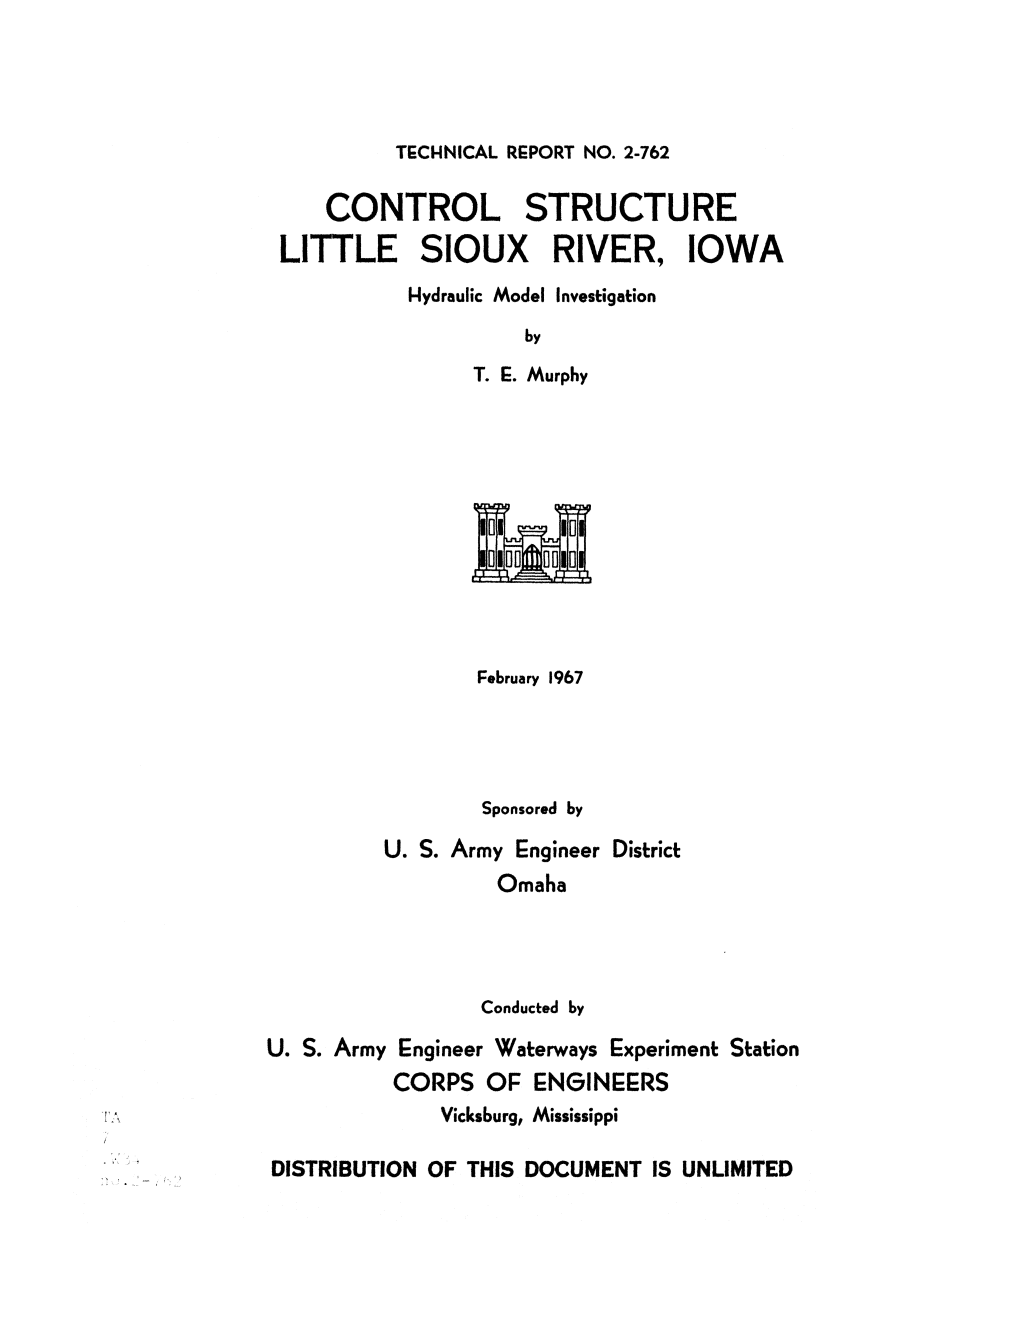 CONTROL STRUCTURE LITTLE SIOUX RIVER, IOWA Hydraulic Model Investigation By